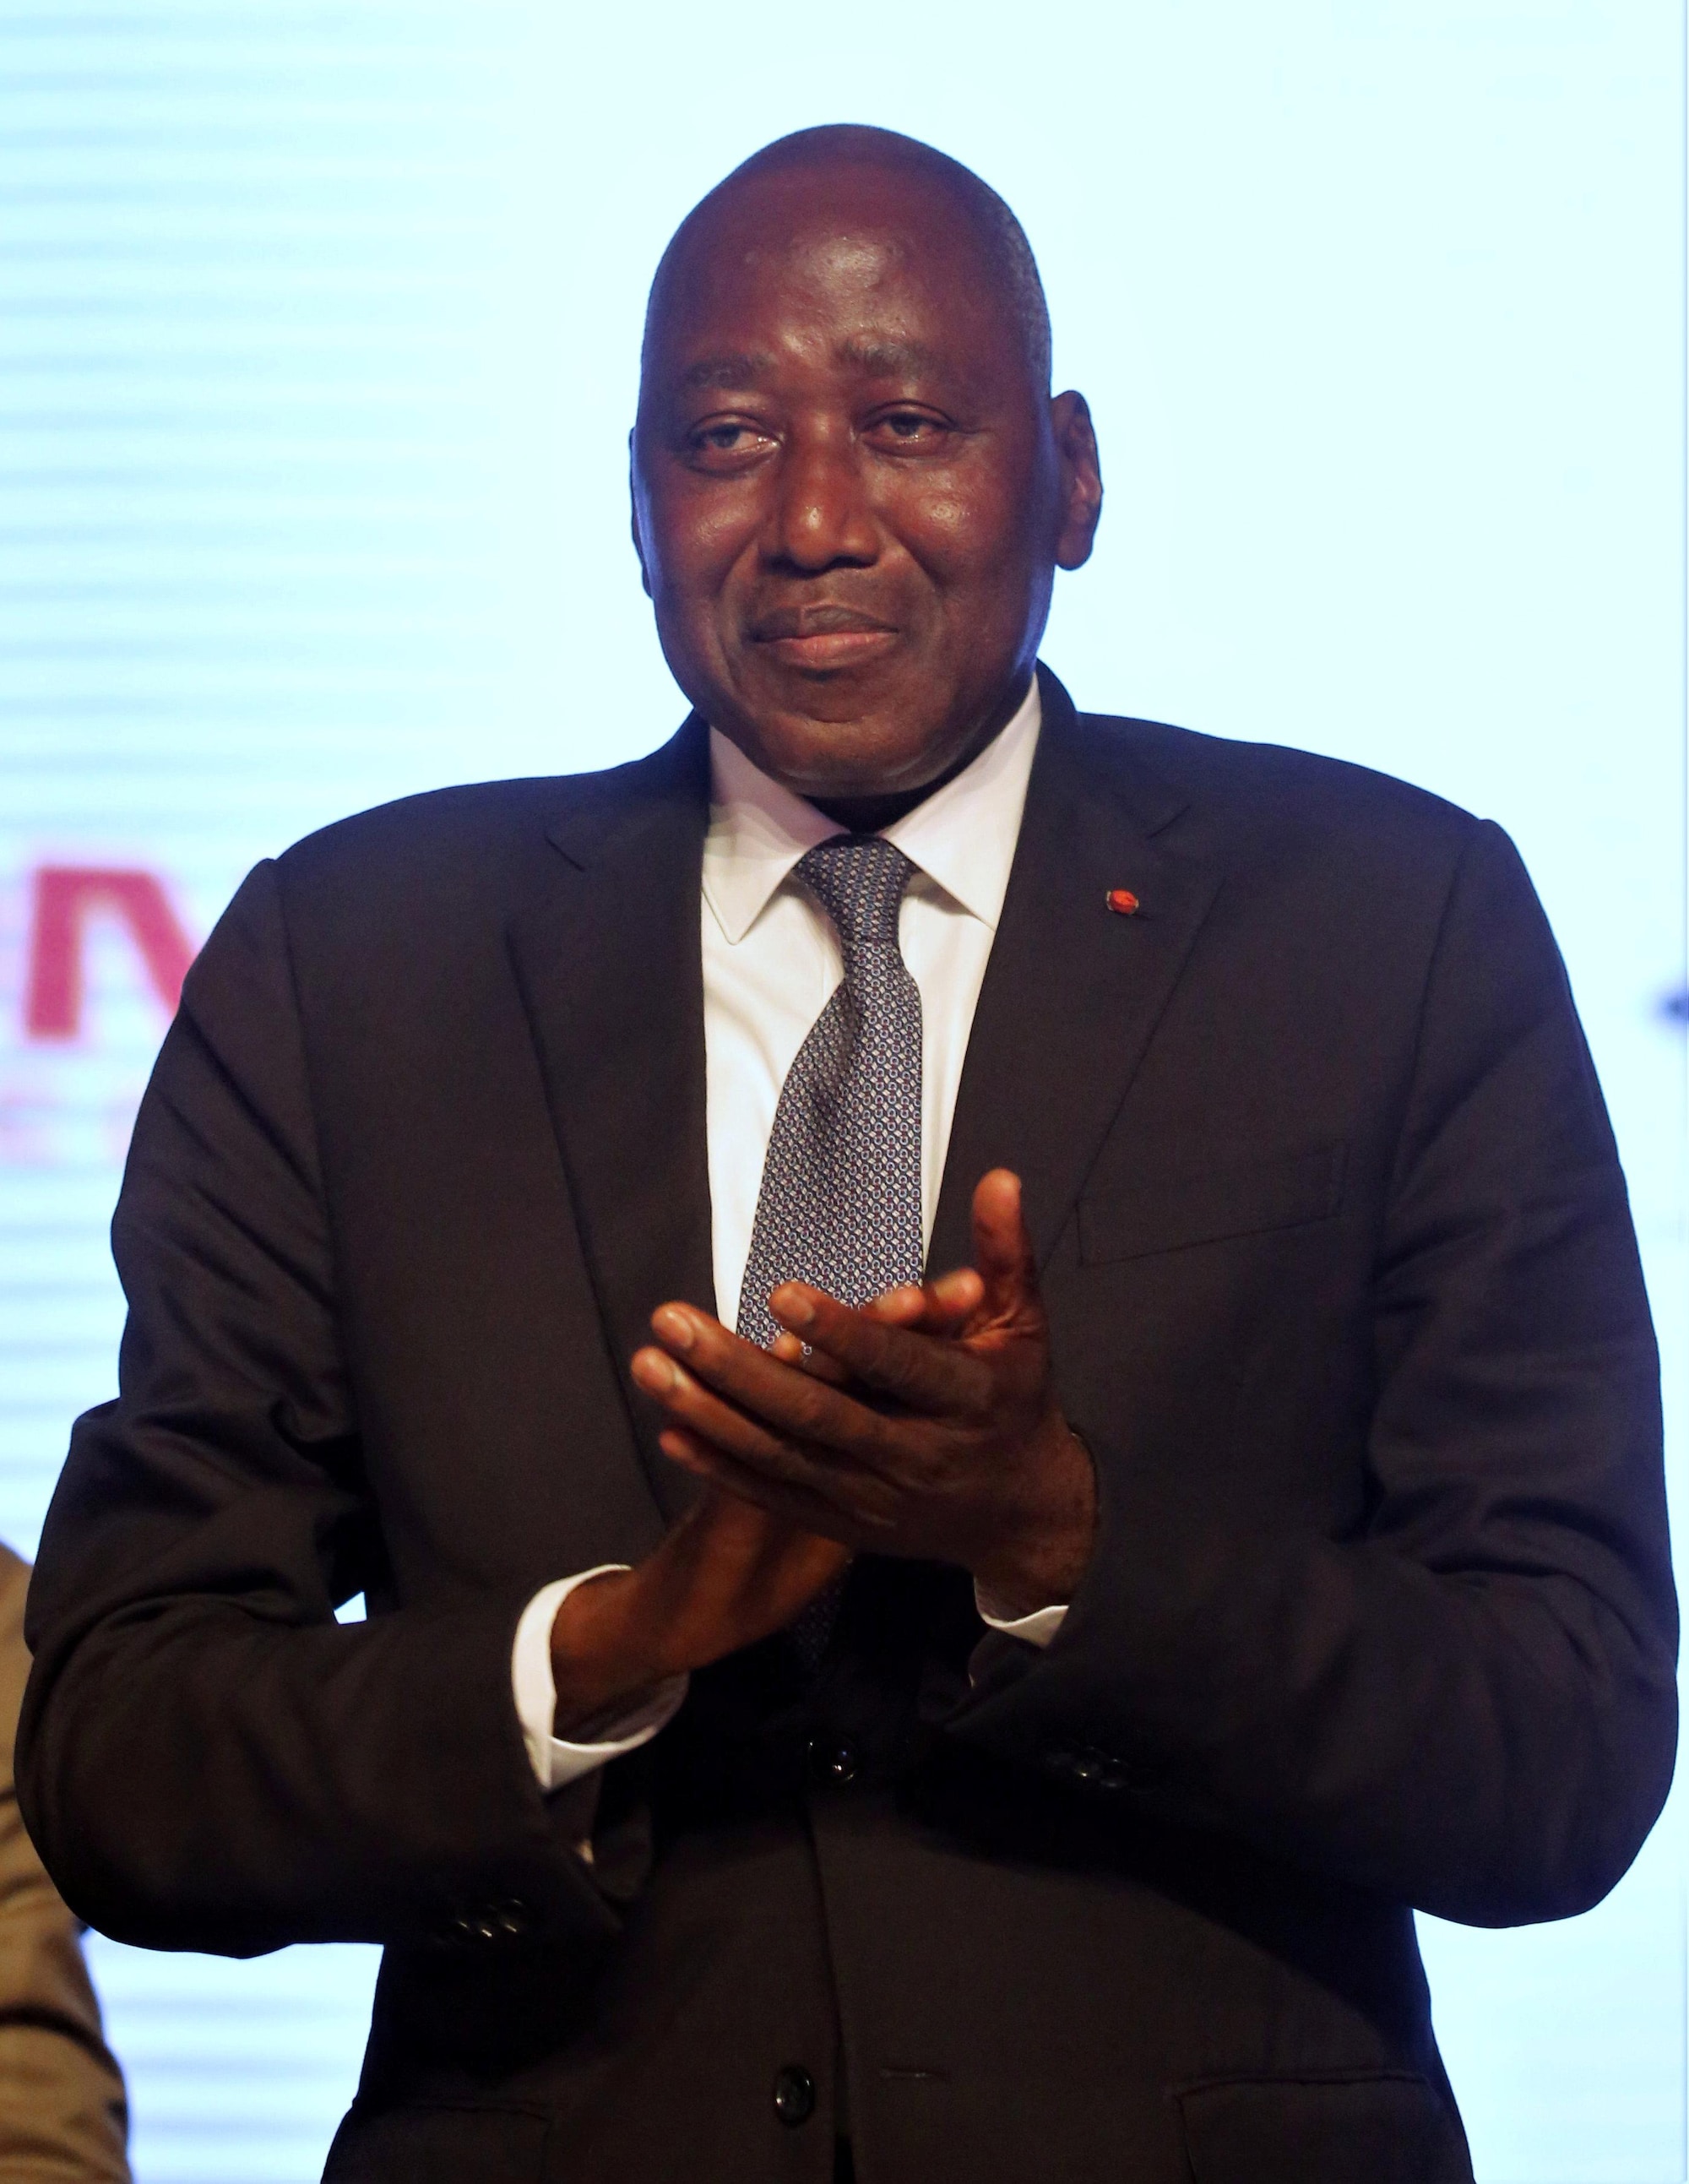 Ivory Coast premier and wouldbe president Gon Coulibaly dies at 61